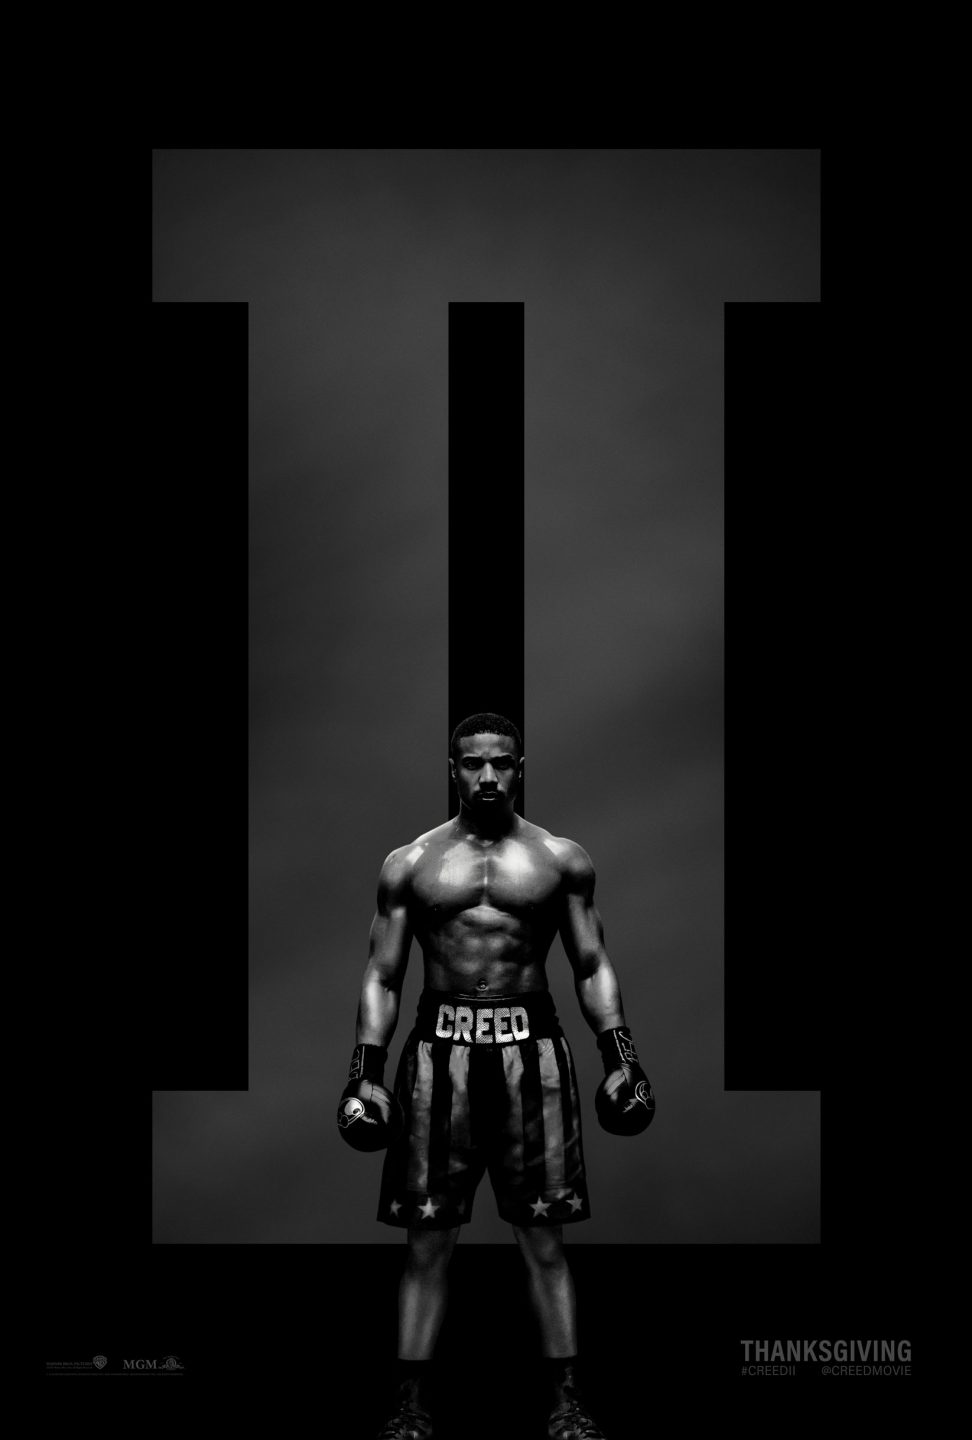 Creed 2 poster (MGM Pictures)